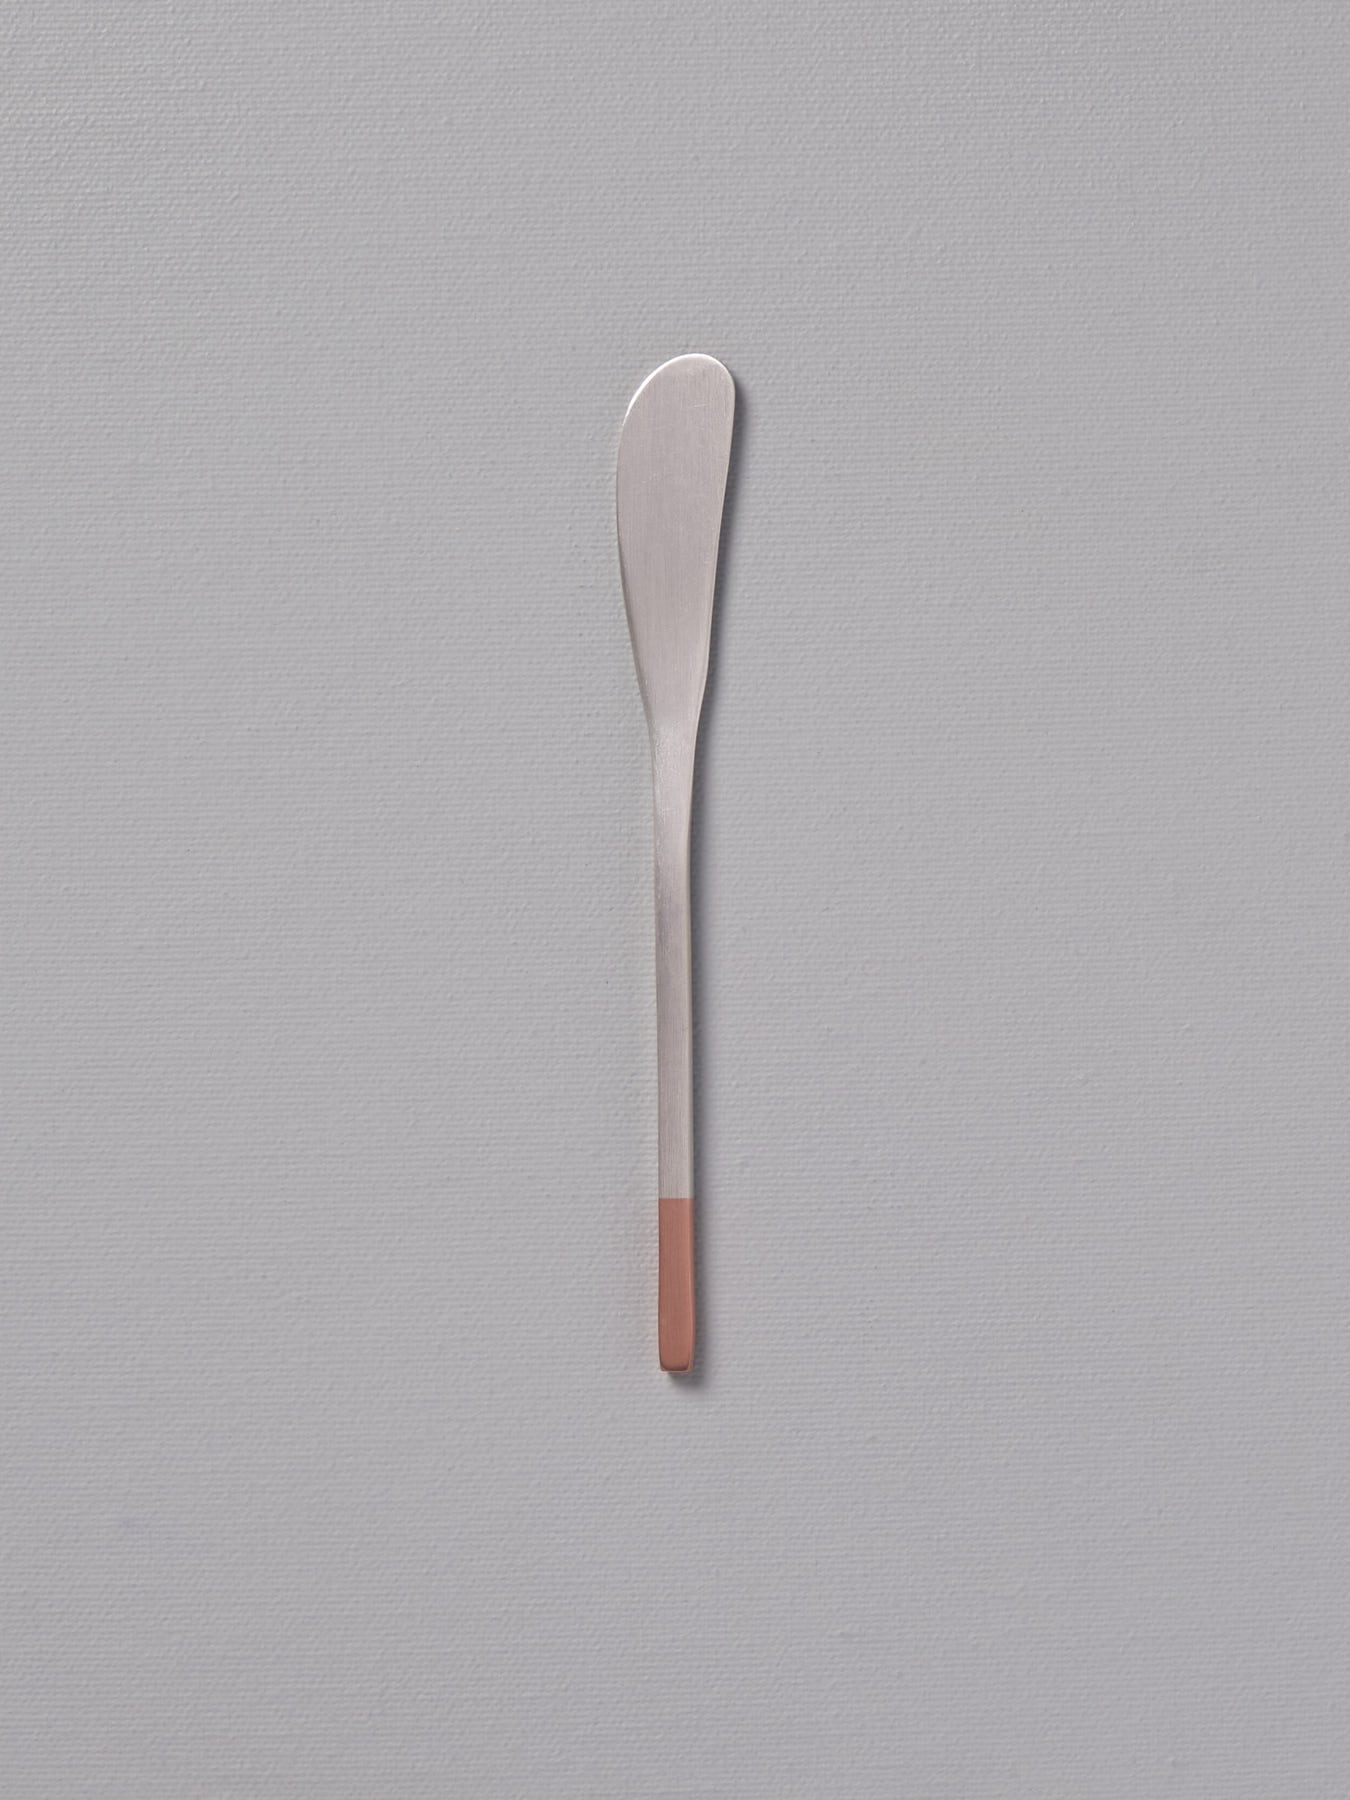 A Copper & Stainless Steel Butter Knife by Kobo Aizawa sitting on a gray surface.